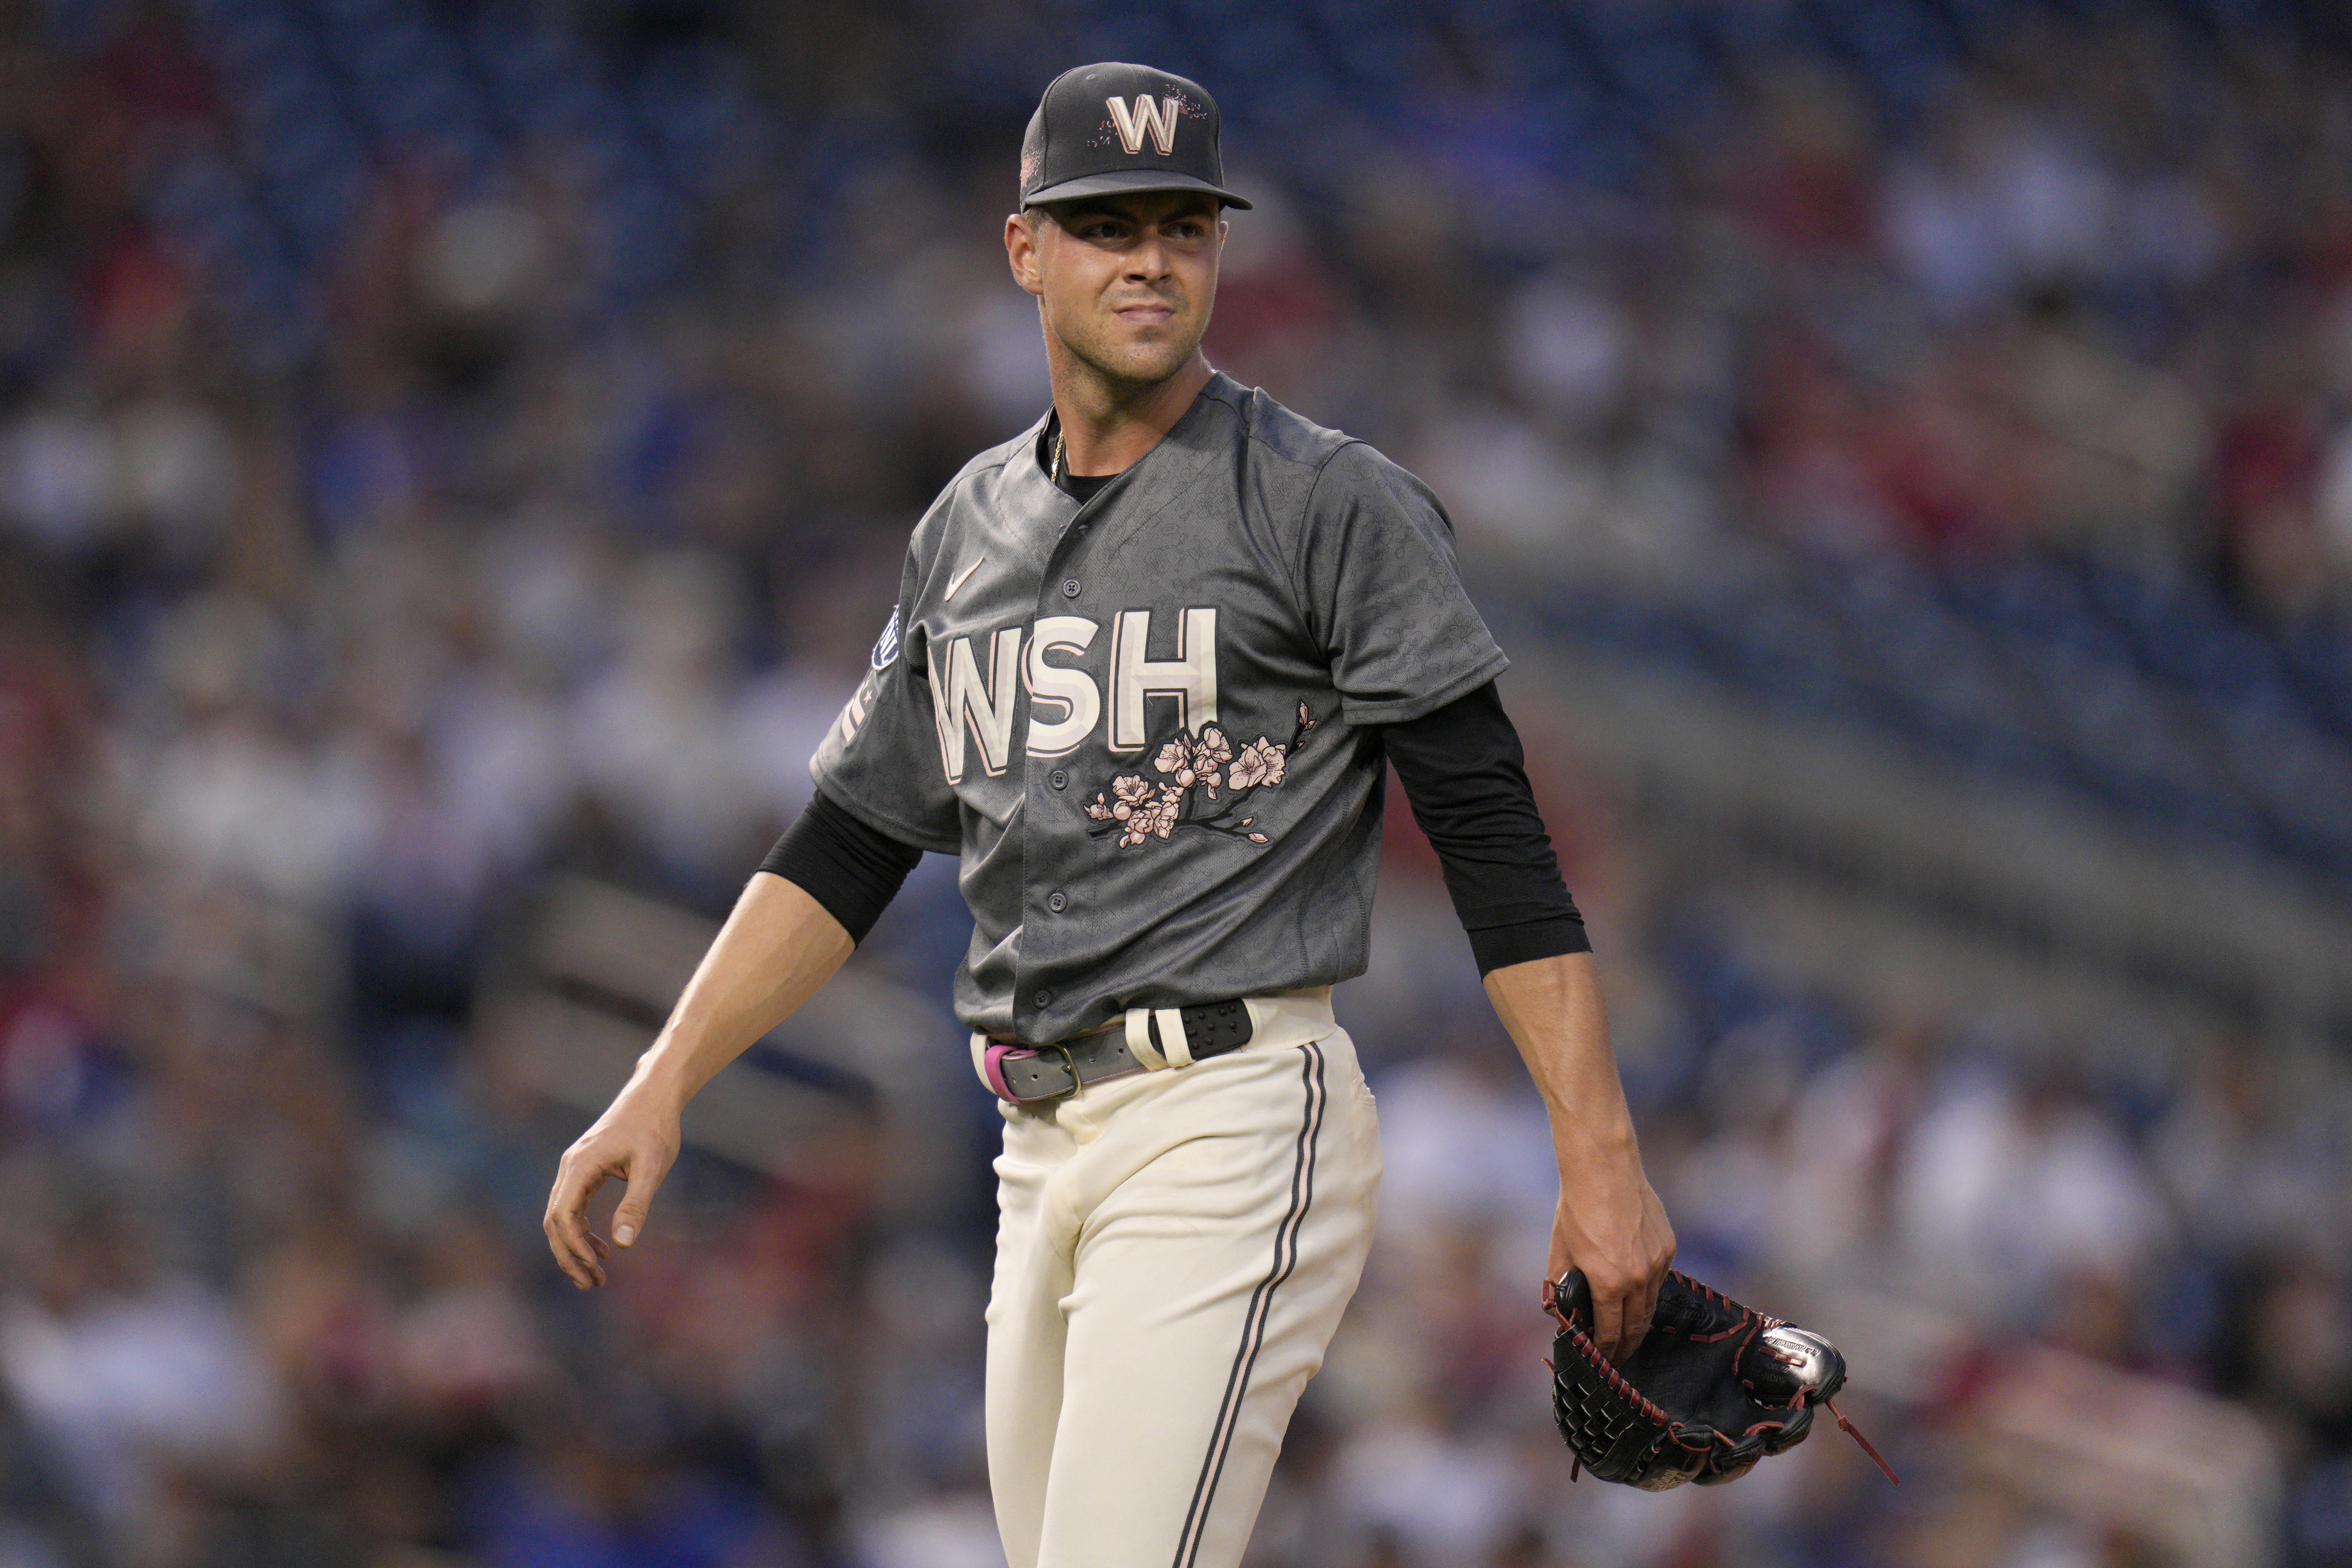 Washington Nationals news & notes: Nats win 2 of 3 in SEA with 4-1